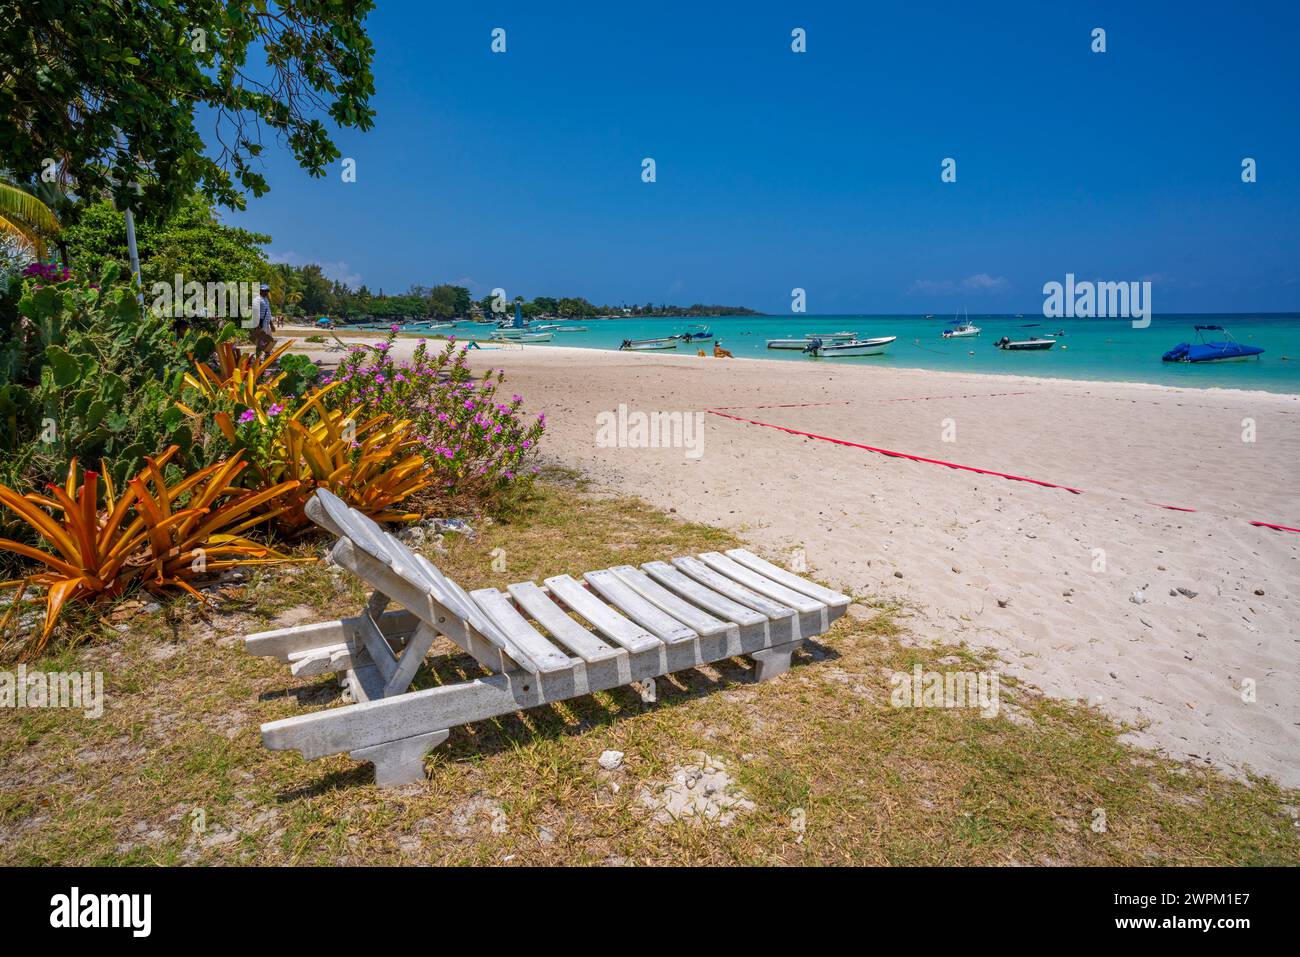 View of Beach at Trou-aux-Biches and turquoise Indian Ocean on sunny day, Trou-aux-Biches, Mauritius, Indian Ocean, Africa Stock Photo